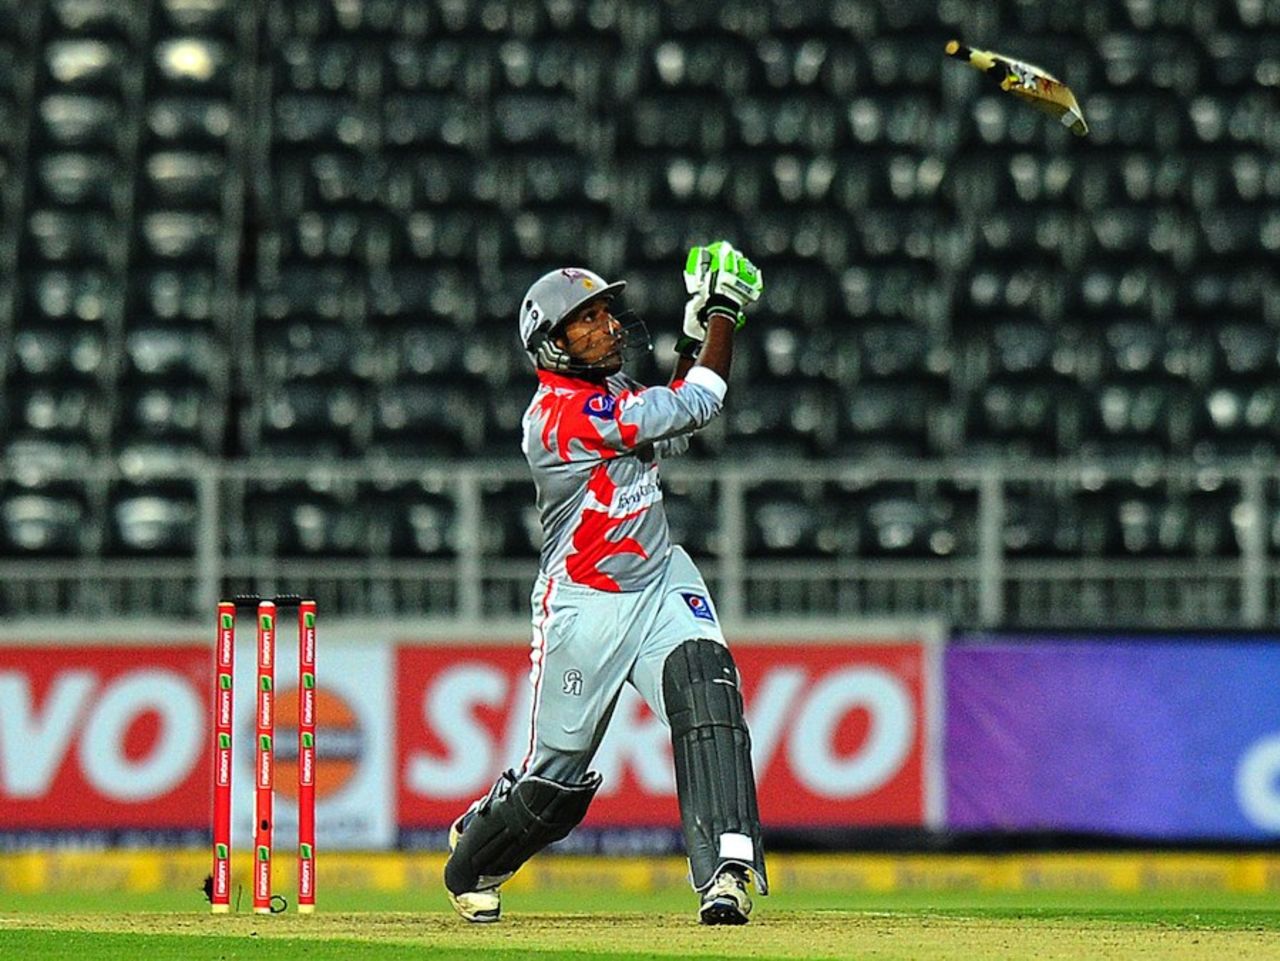 Bilawal Bhatti loses grip on his bat, Auckland Aces v Sialkot Stallions, Champions League T20, Johannesburg, October 9, 2012